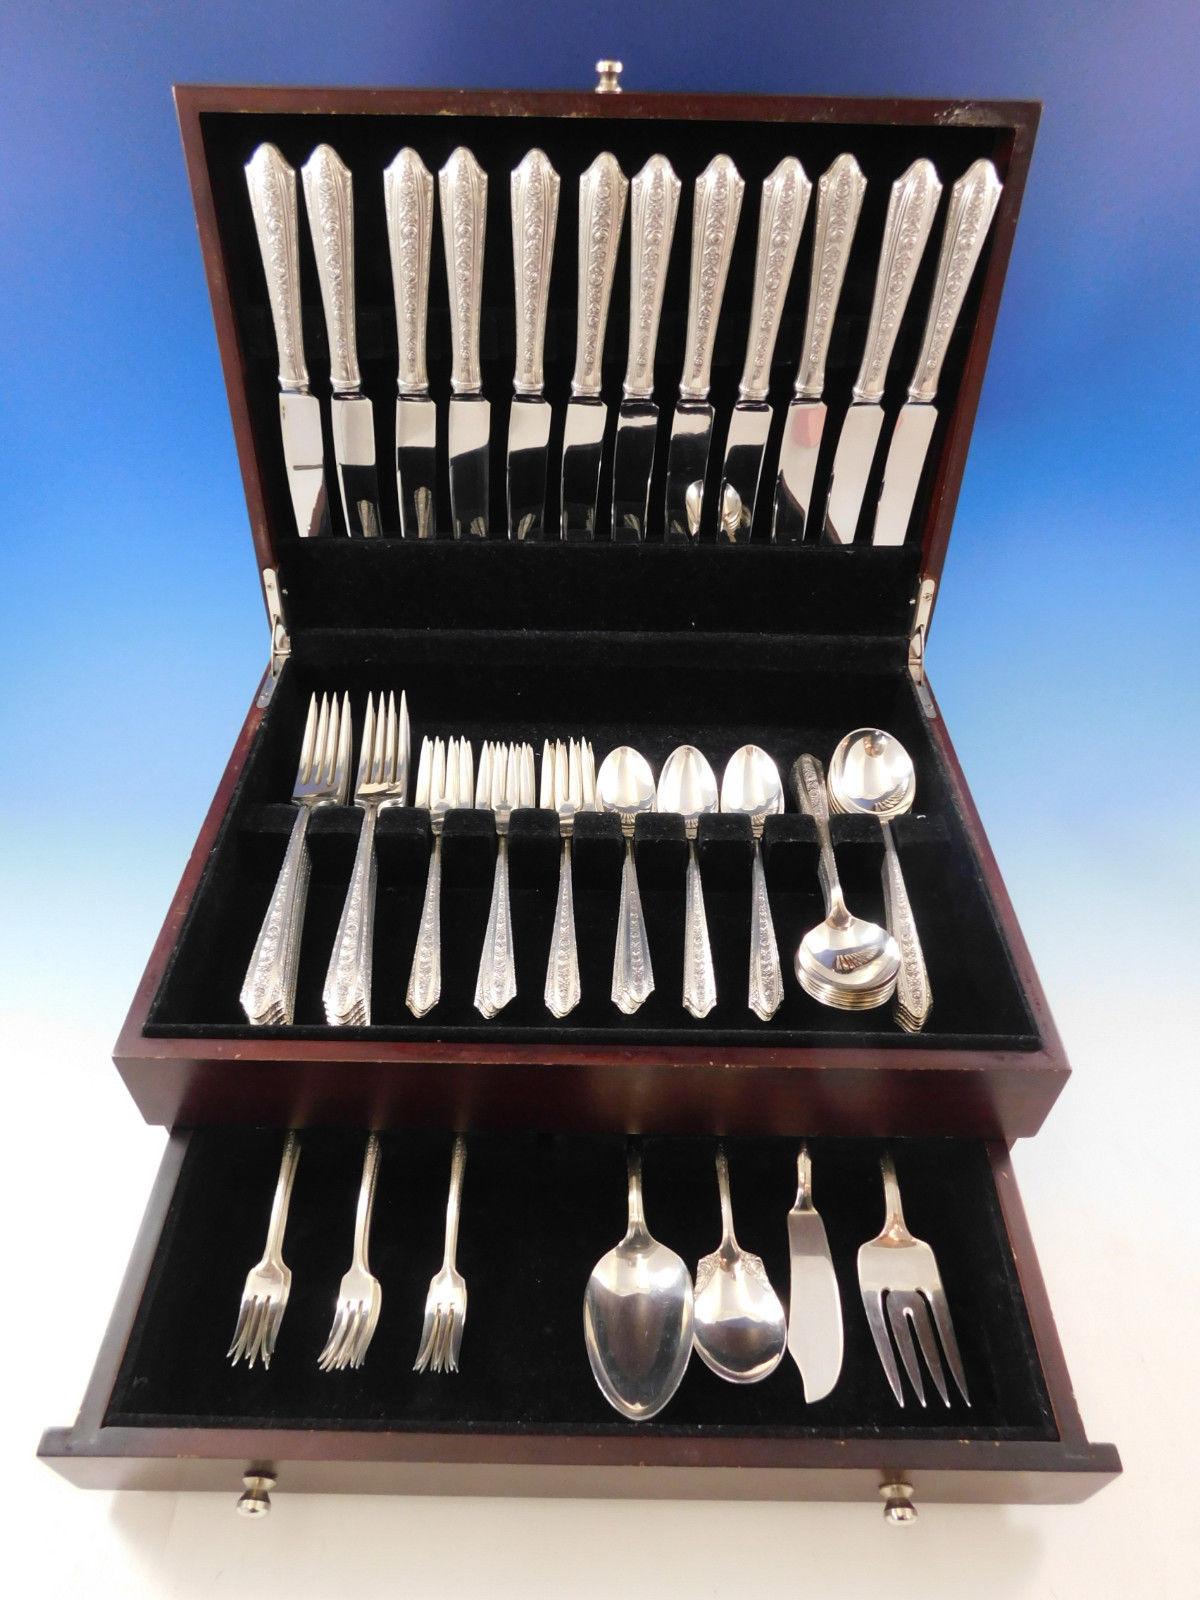 Exquisite dinner size Normandie by Wallace sterling silver flatware set with rose motif - 76 pieces. This set includes:

12 dinner size knives, 9 3/4